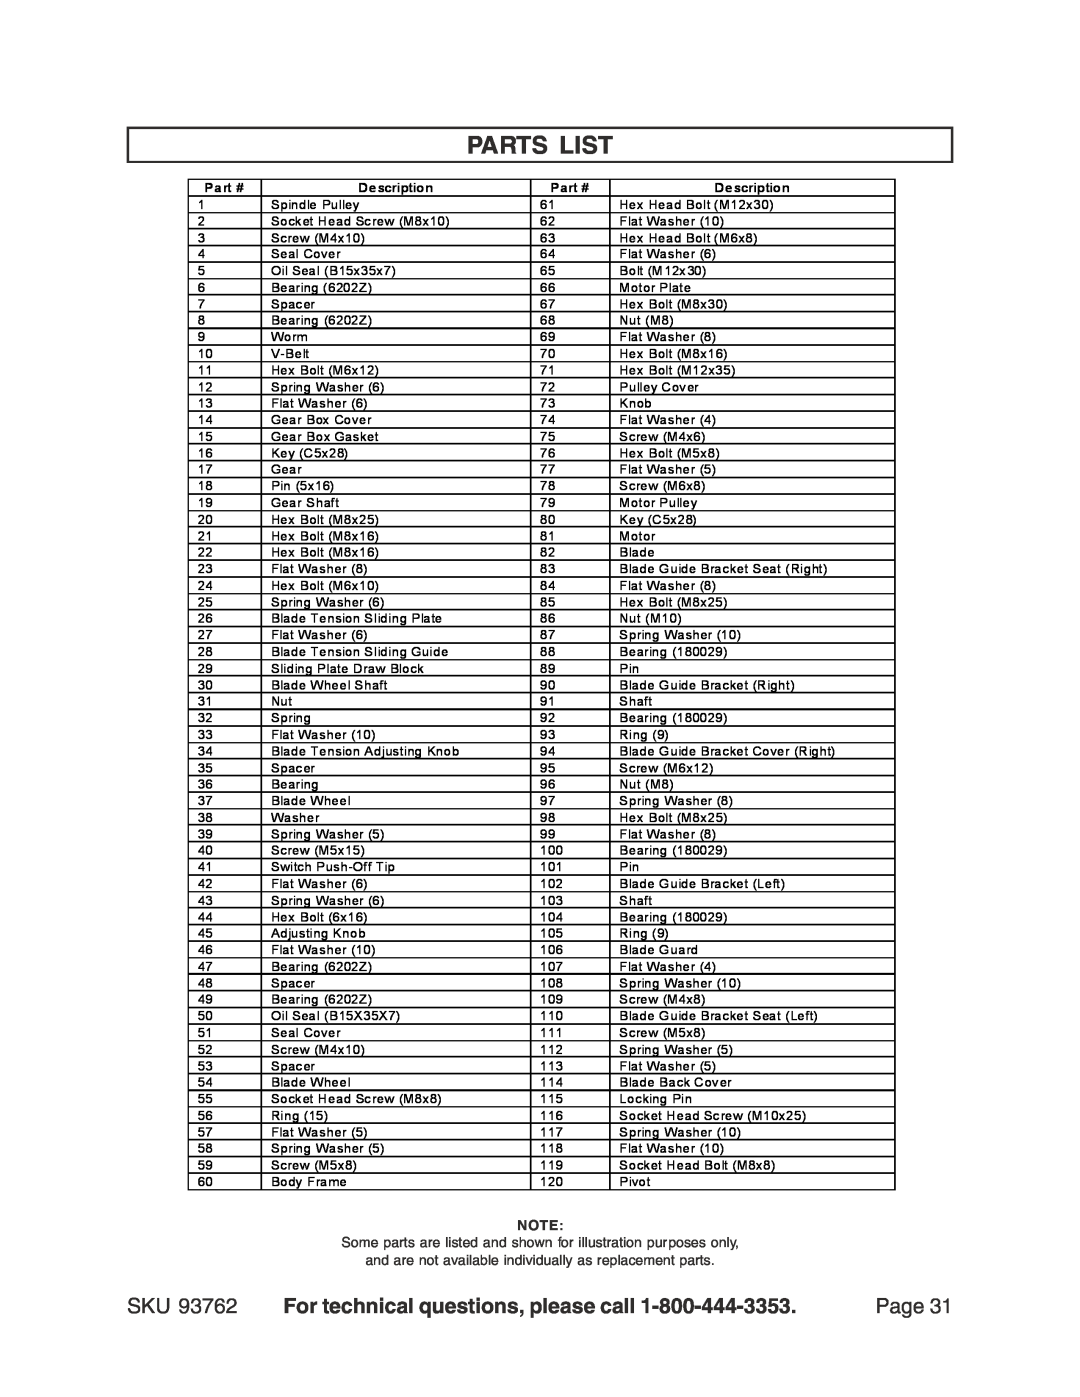 Harbor Freight Tools 93762 Parts List, For technical questions, please call, Page, Part #, Description 